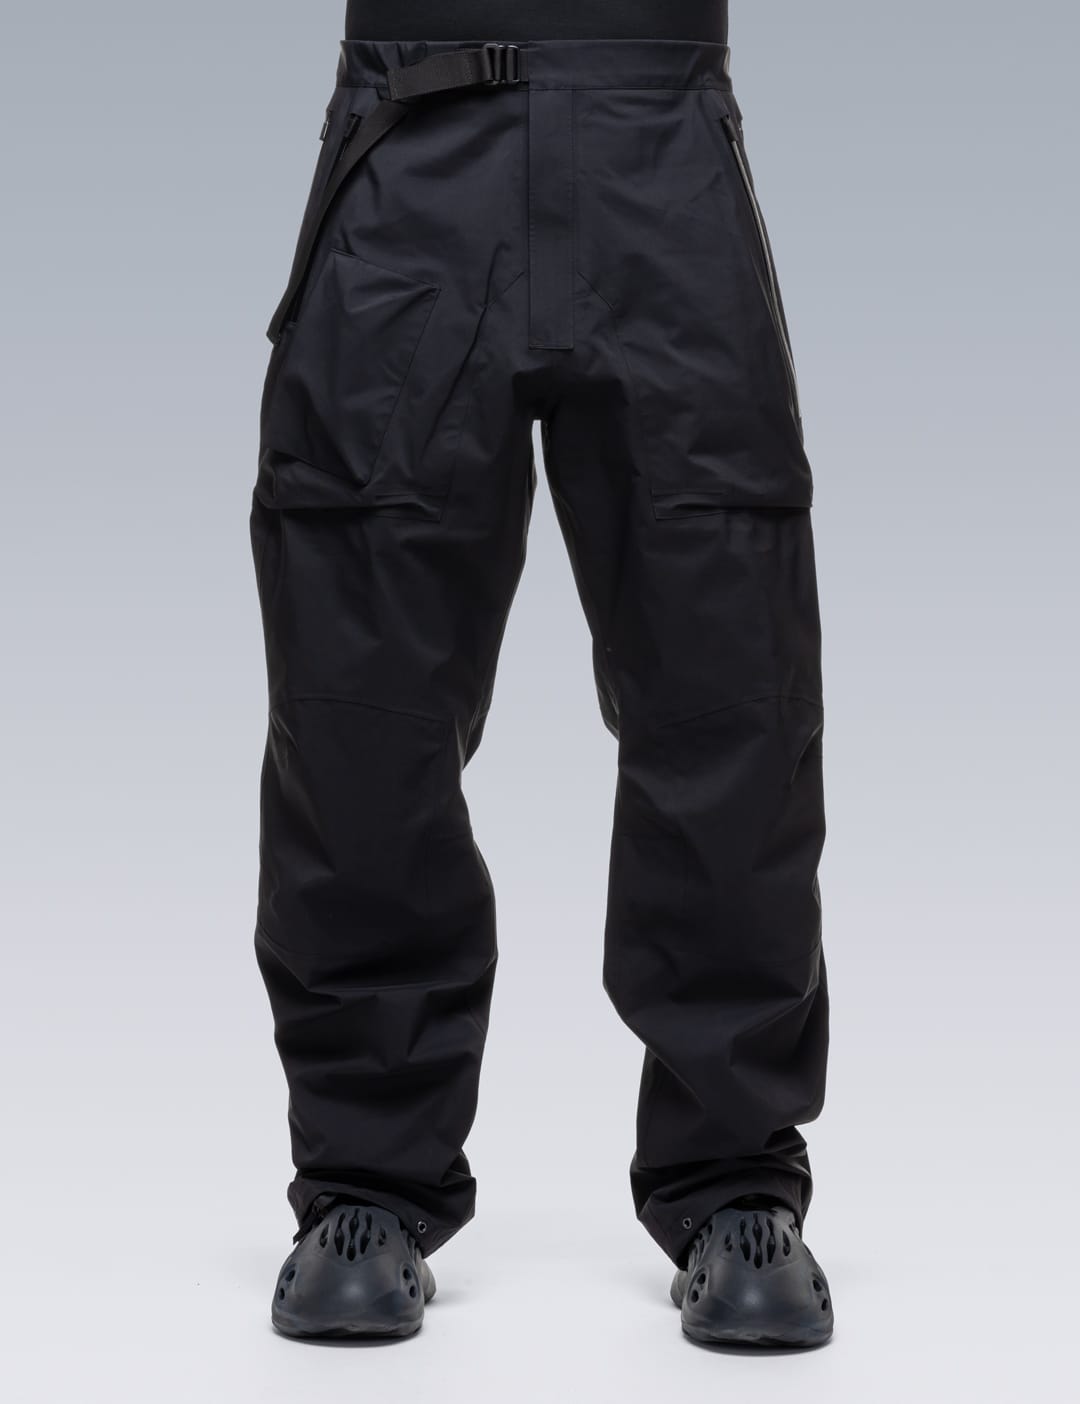 ACRONYM - 3L Gore-Tex Pro Pants | HBX - Globally Curated Fashion 